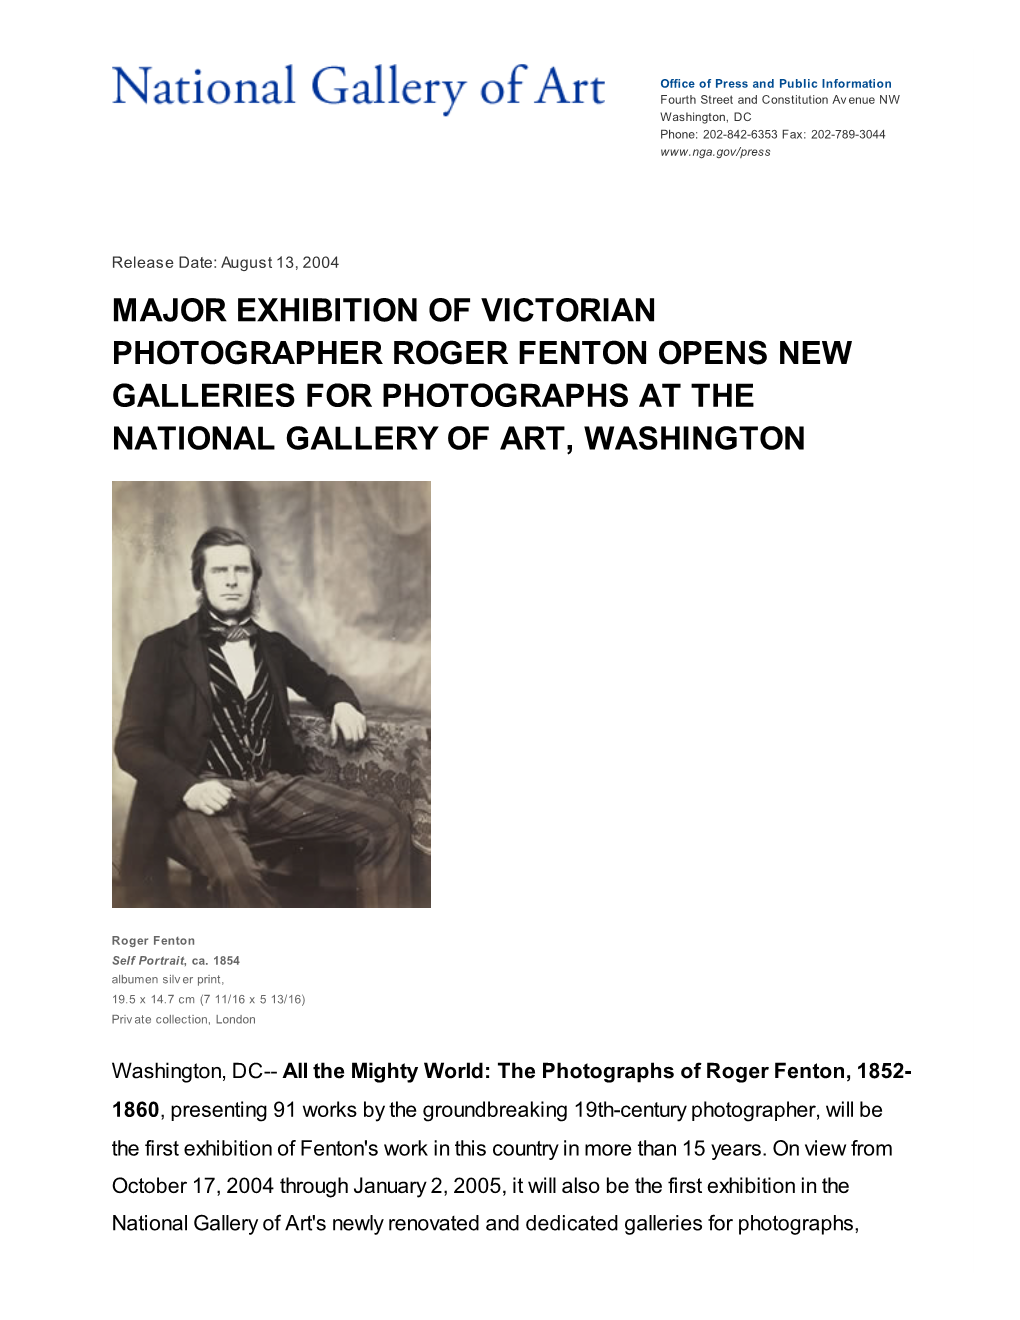 Major Exhibition of Victorian Photographer Roger Fenton Opens New Galleries for Photographs at the National Gallery of Art, Washington